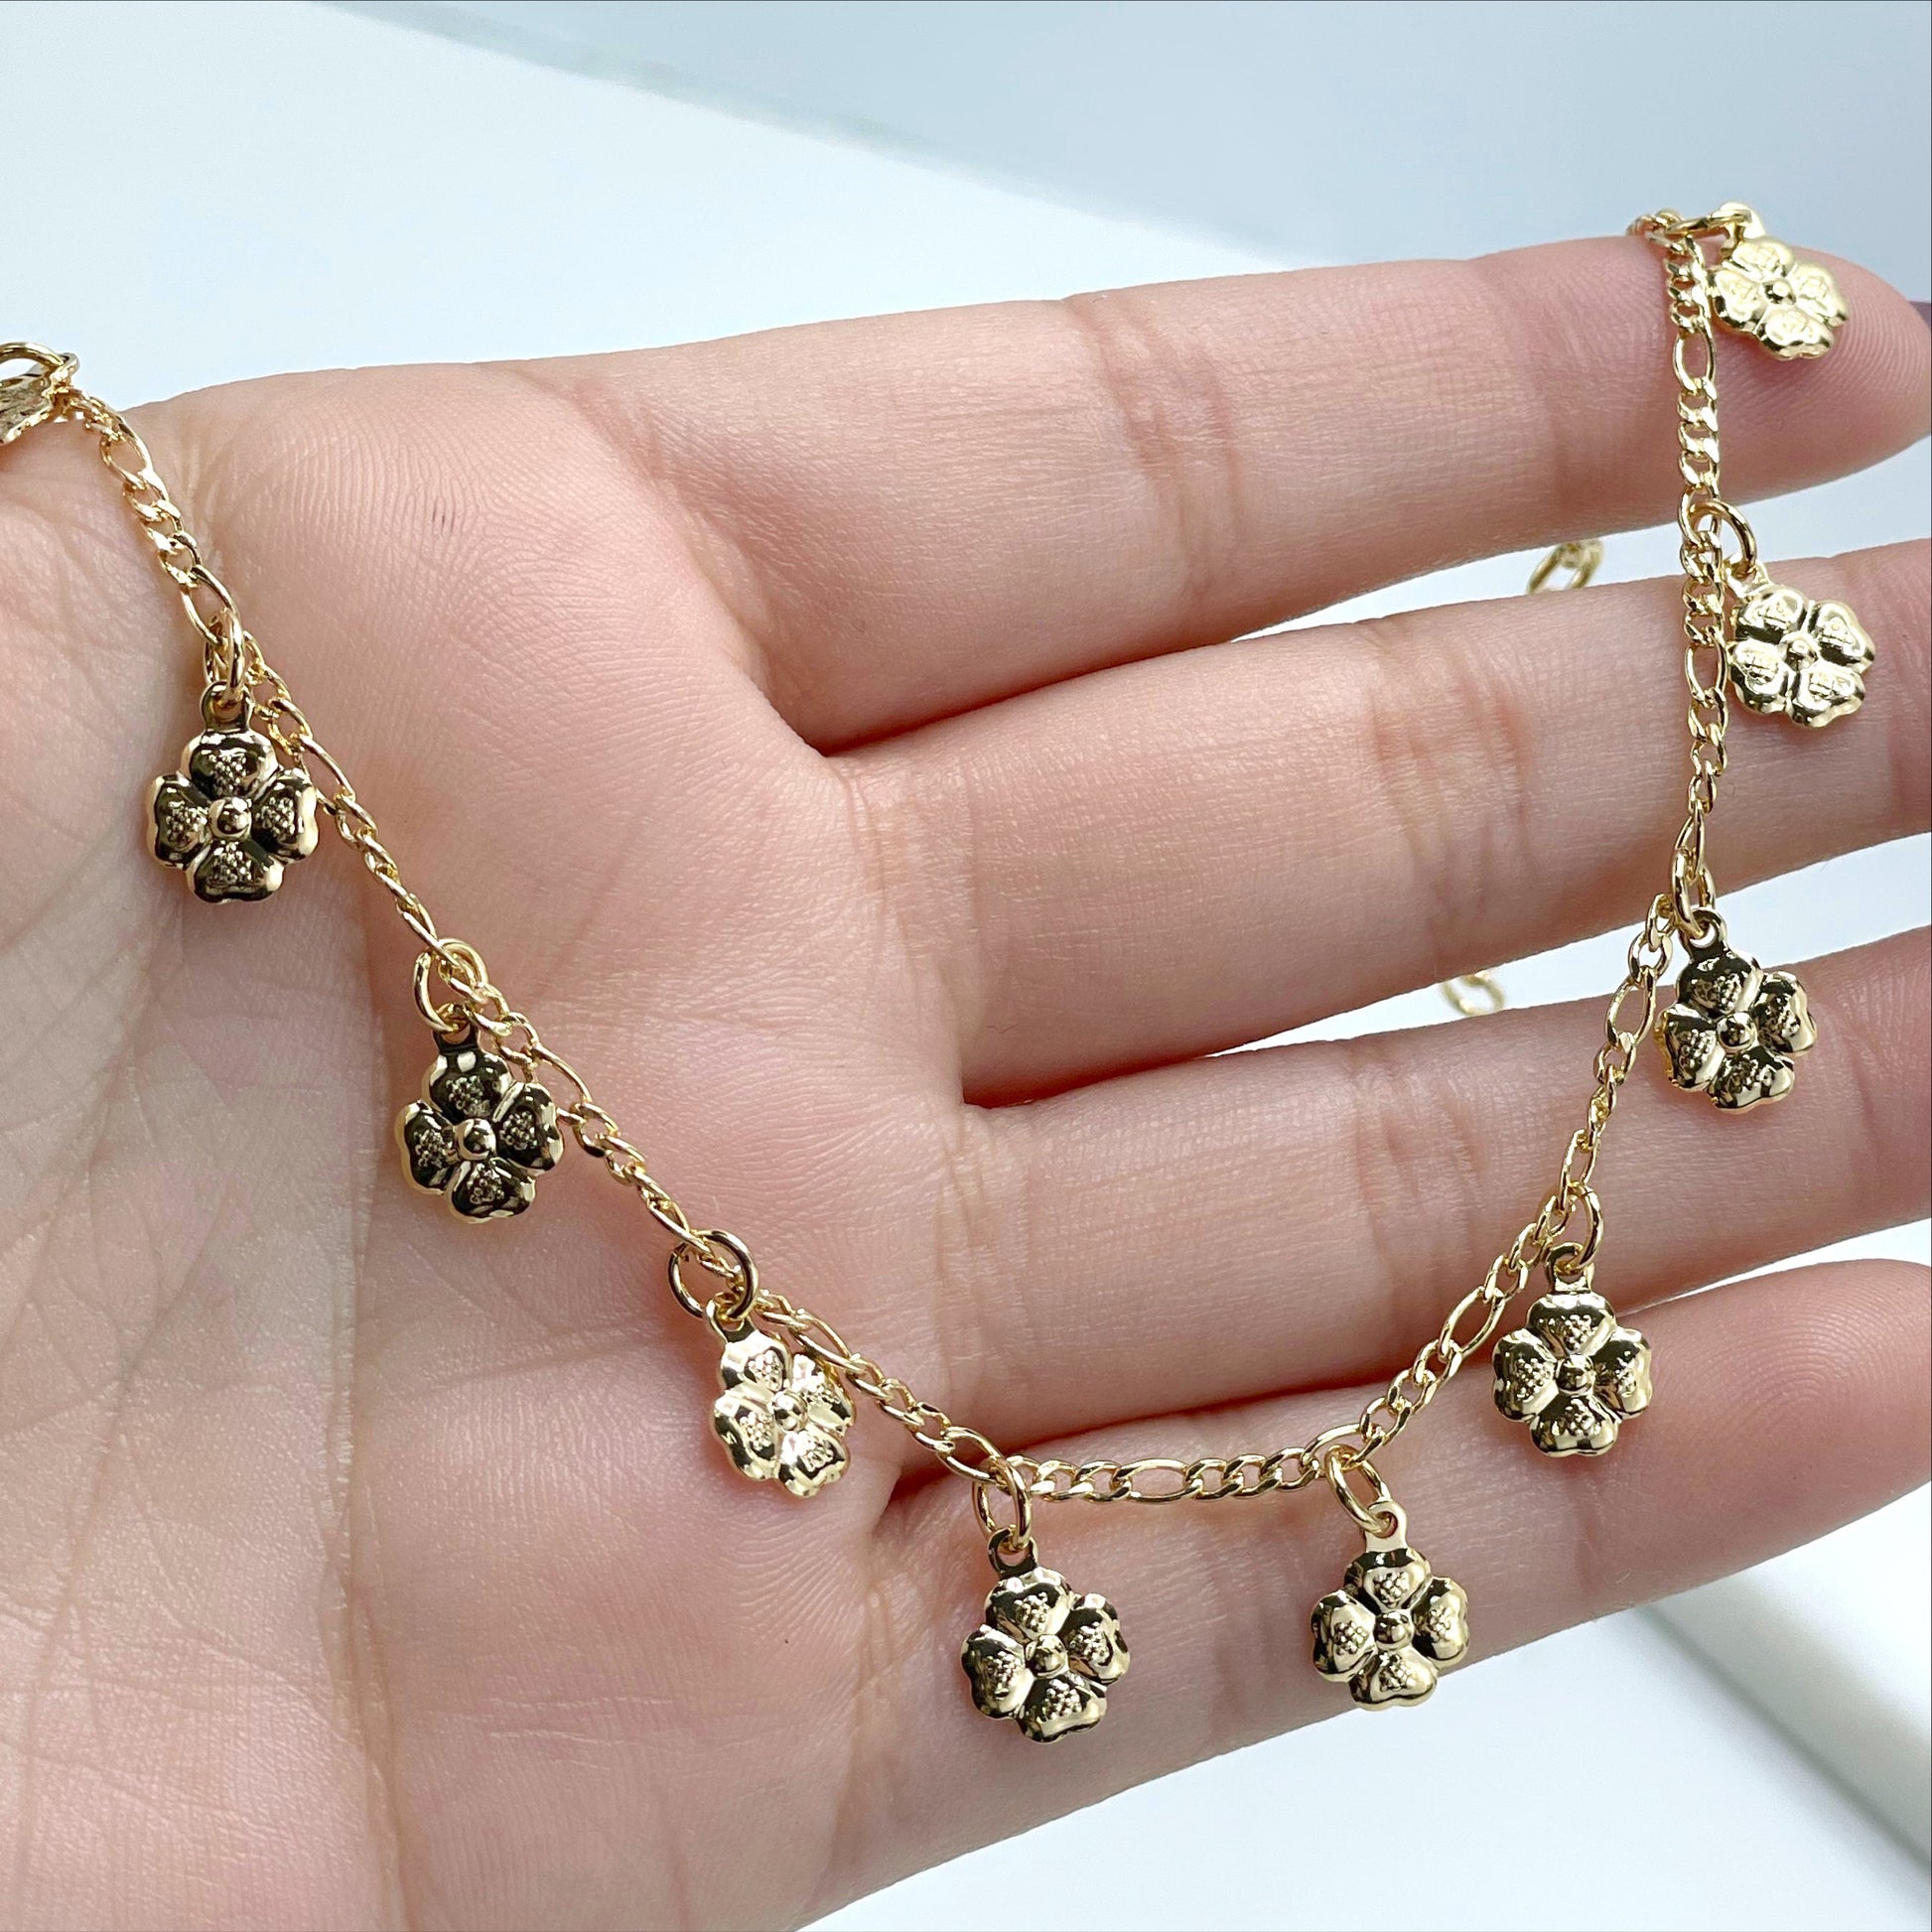 18k Gold Filled 2mm Figaro Link, Flowers Charms Anklet Wholesale Jewelry Supplies